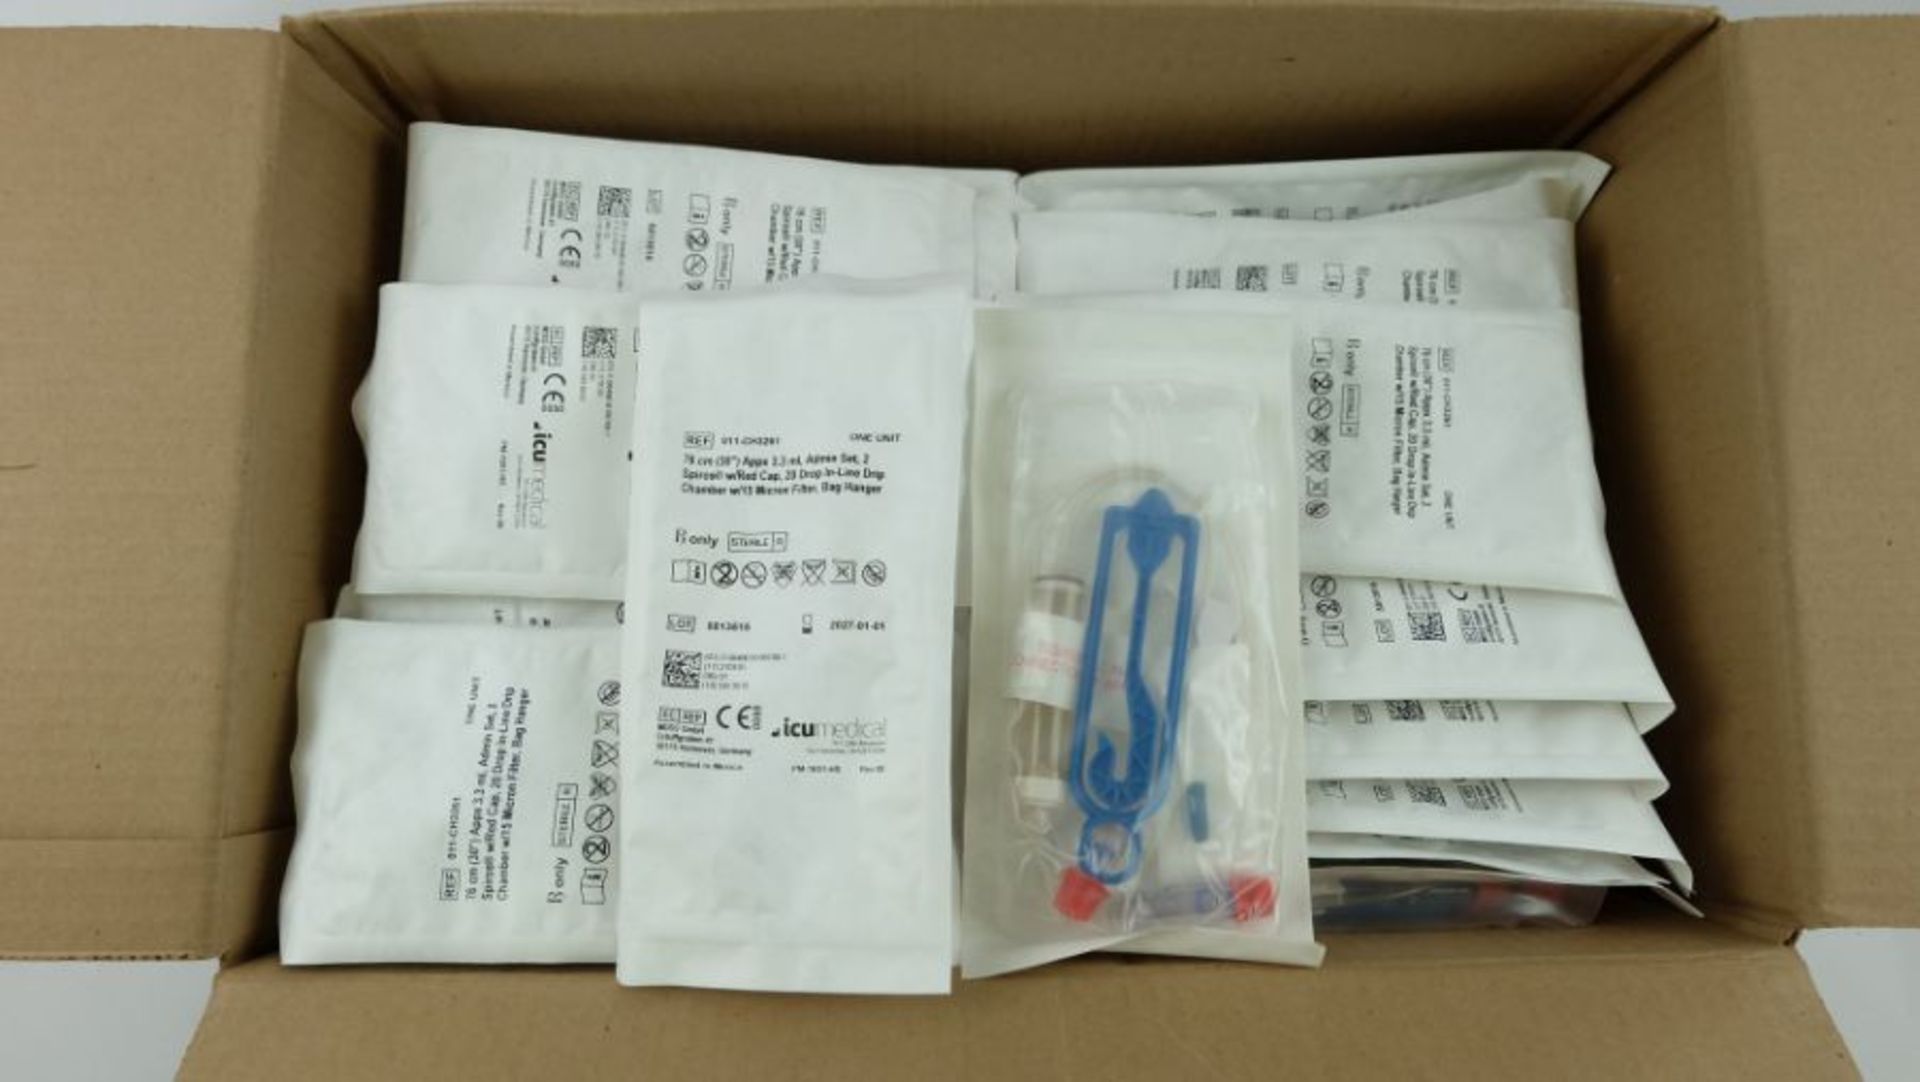 50 x icumedical Drop in Line Drip Chamber w/15 Micron Filter, Bag Hanger, REF 011-CH32, Exp 01/01/